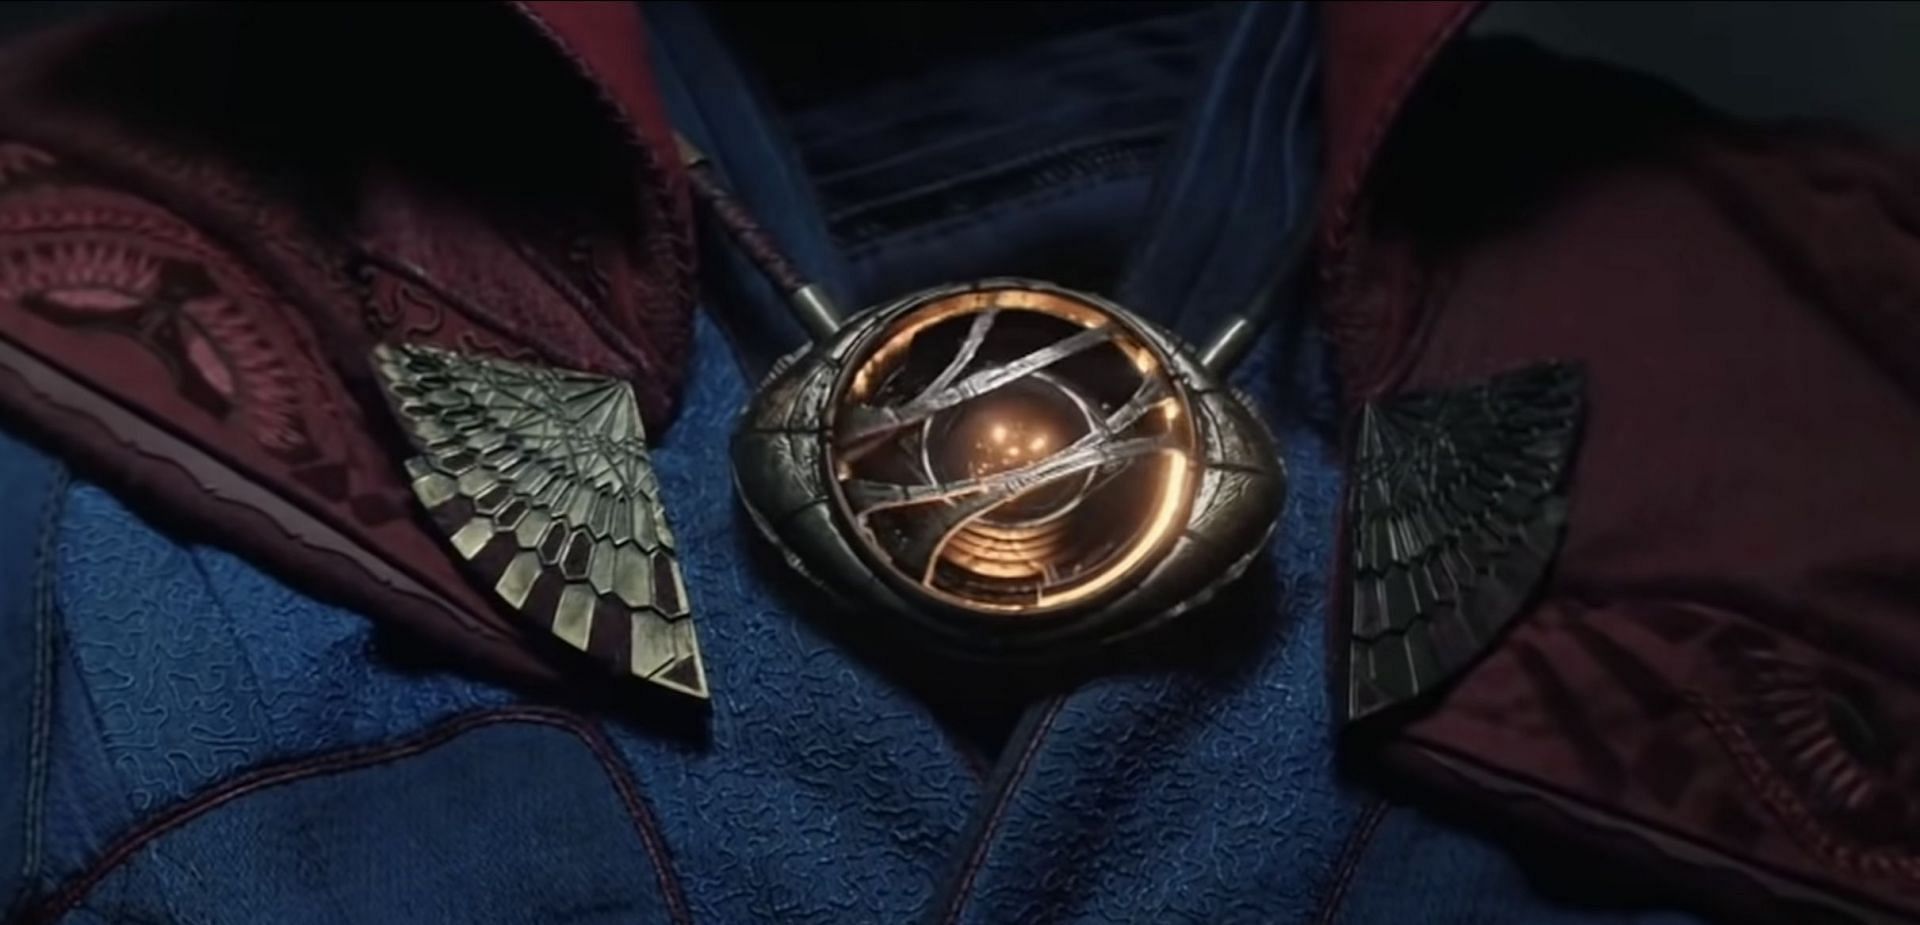 A mystical relic used by the Sorcerer Supreme to manipulate time and reality. (Image via Marvel Studios)